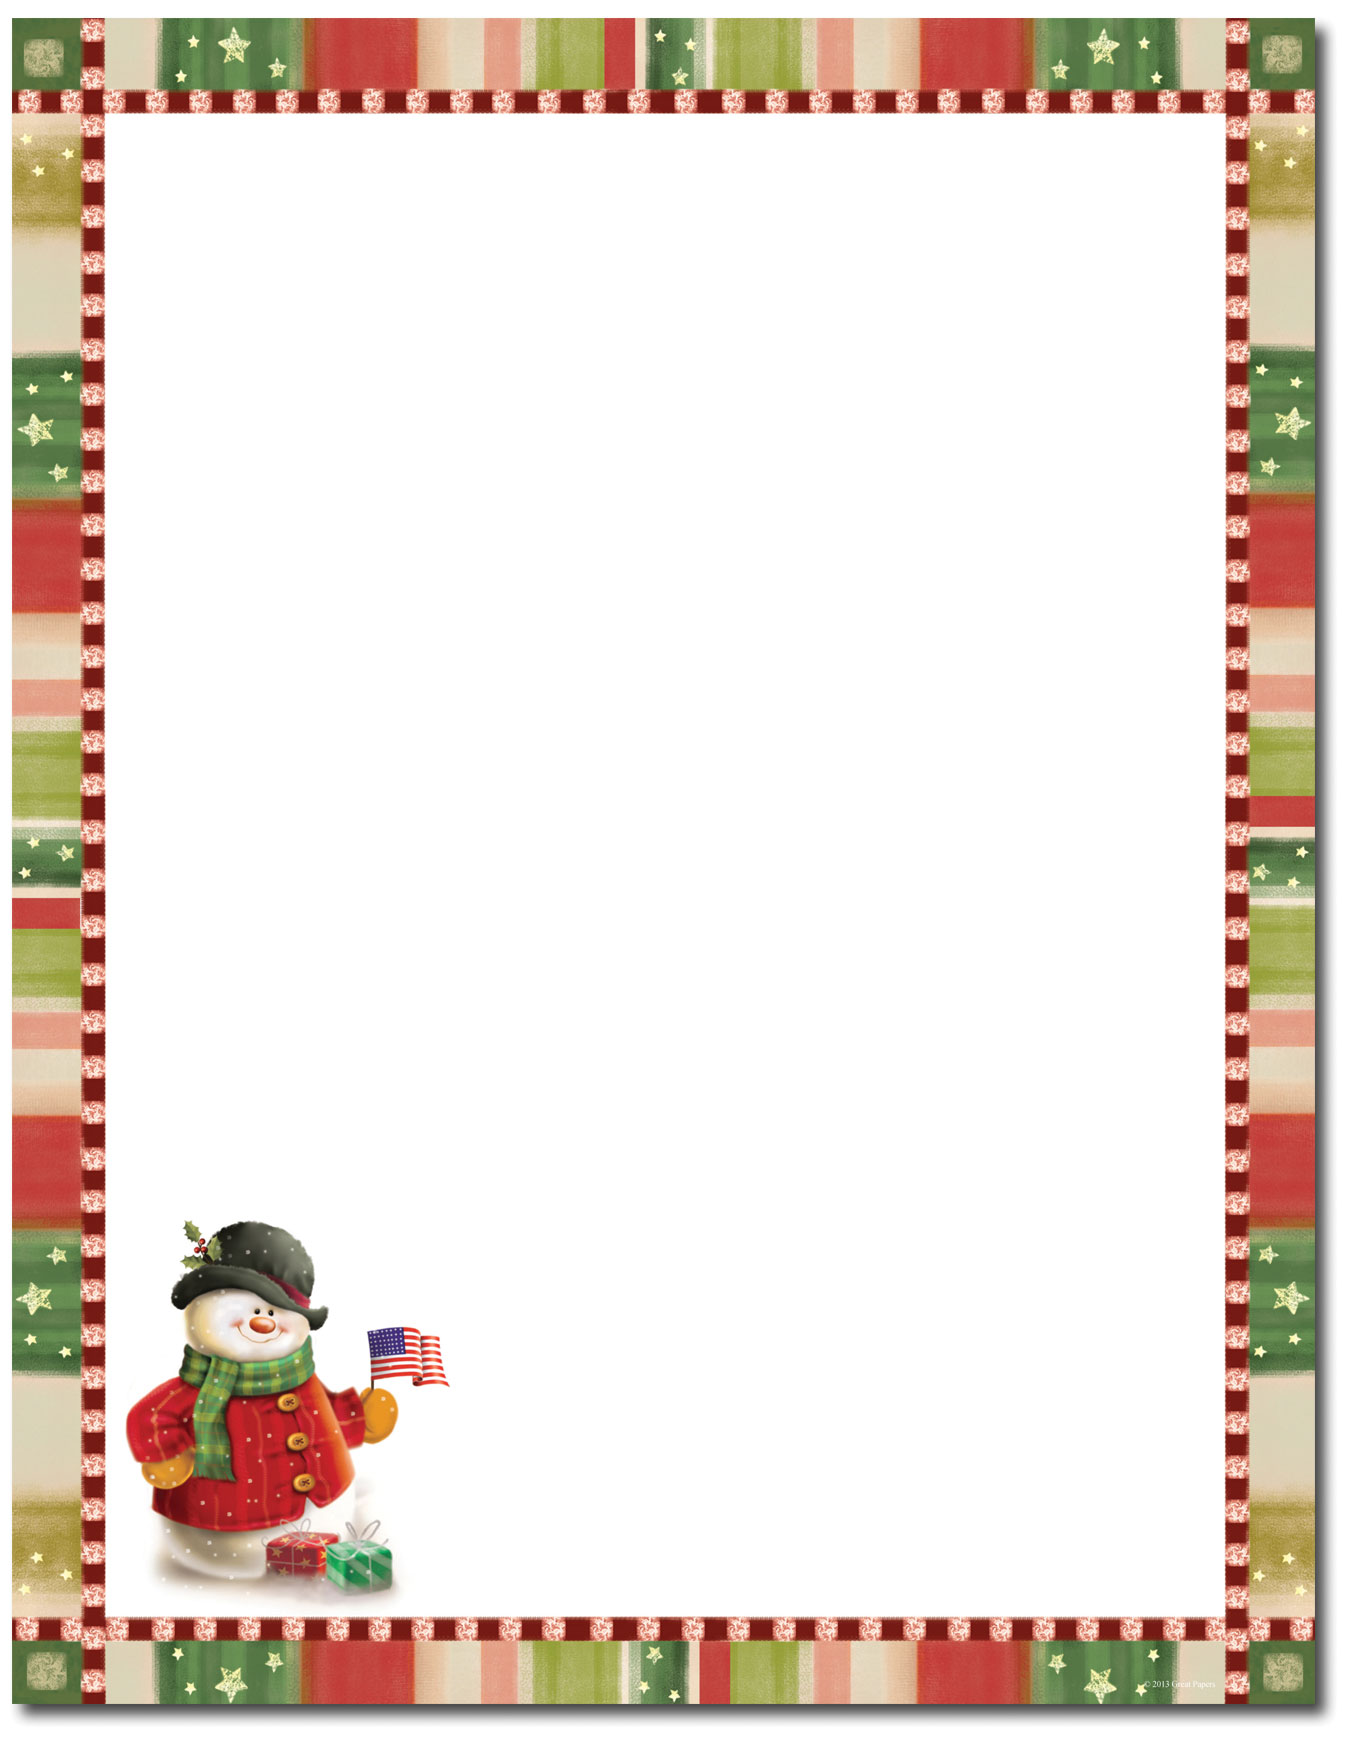 free christmas stationery clipart - photo #46